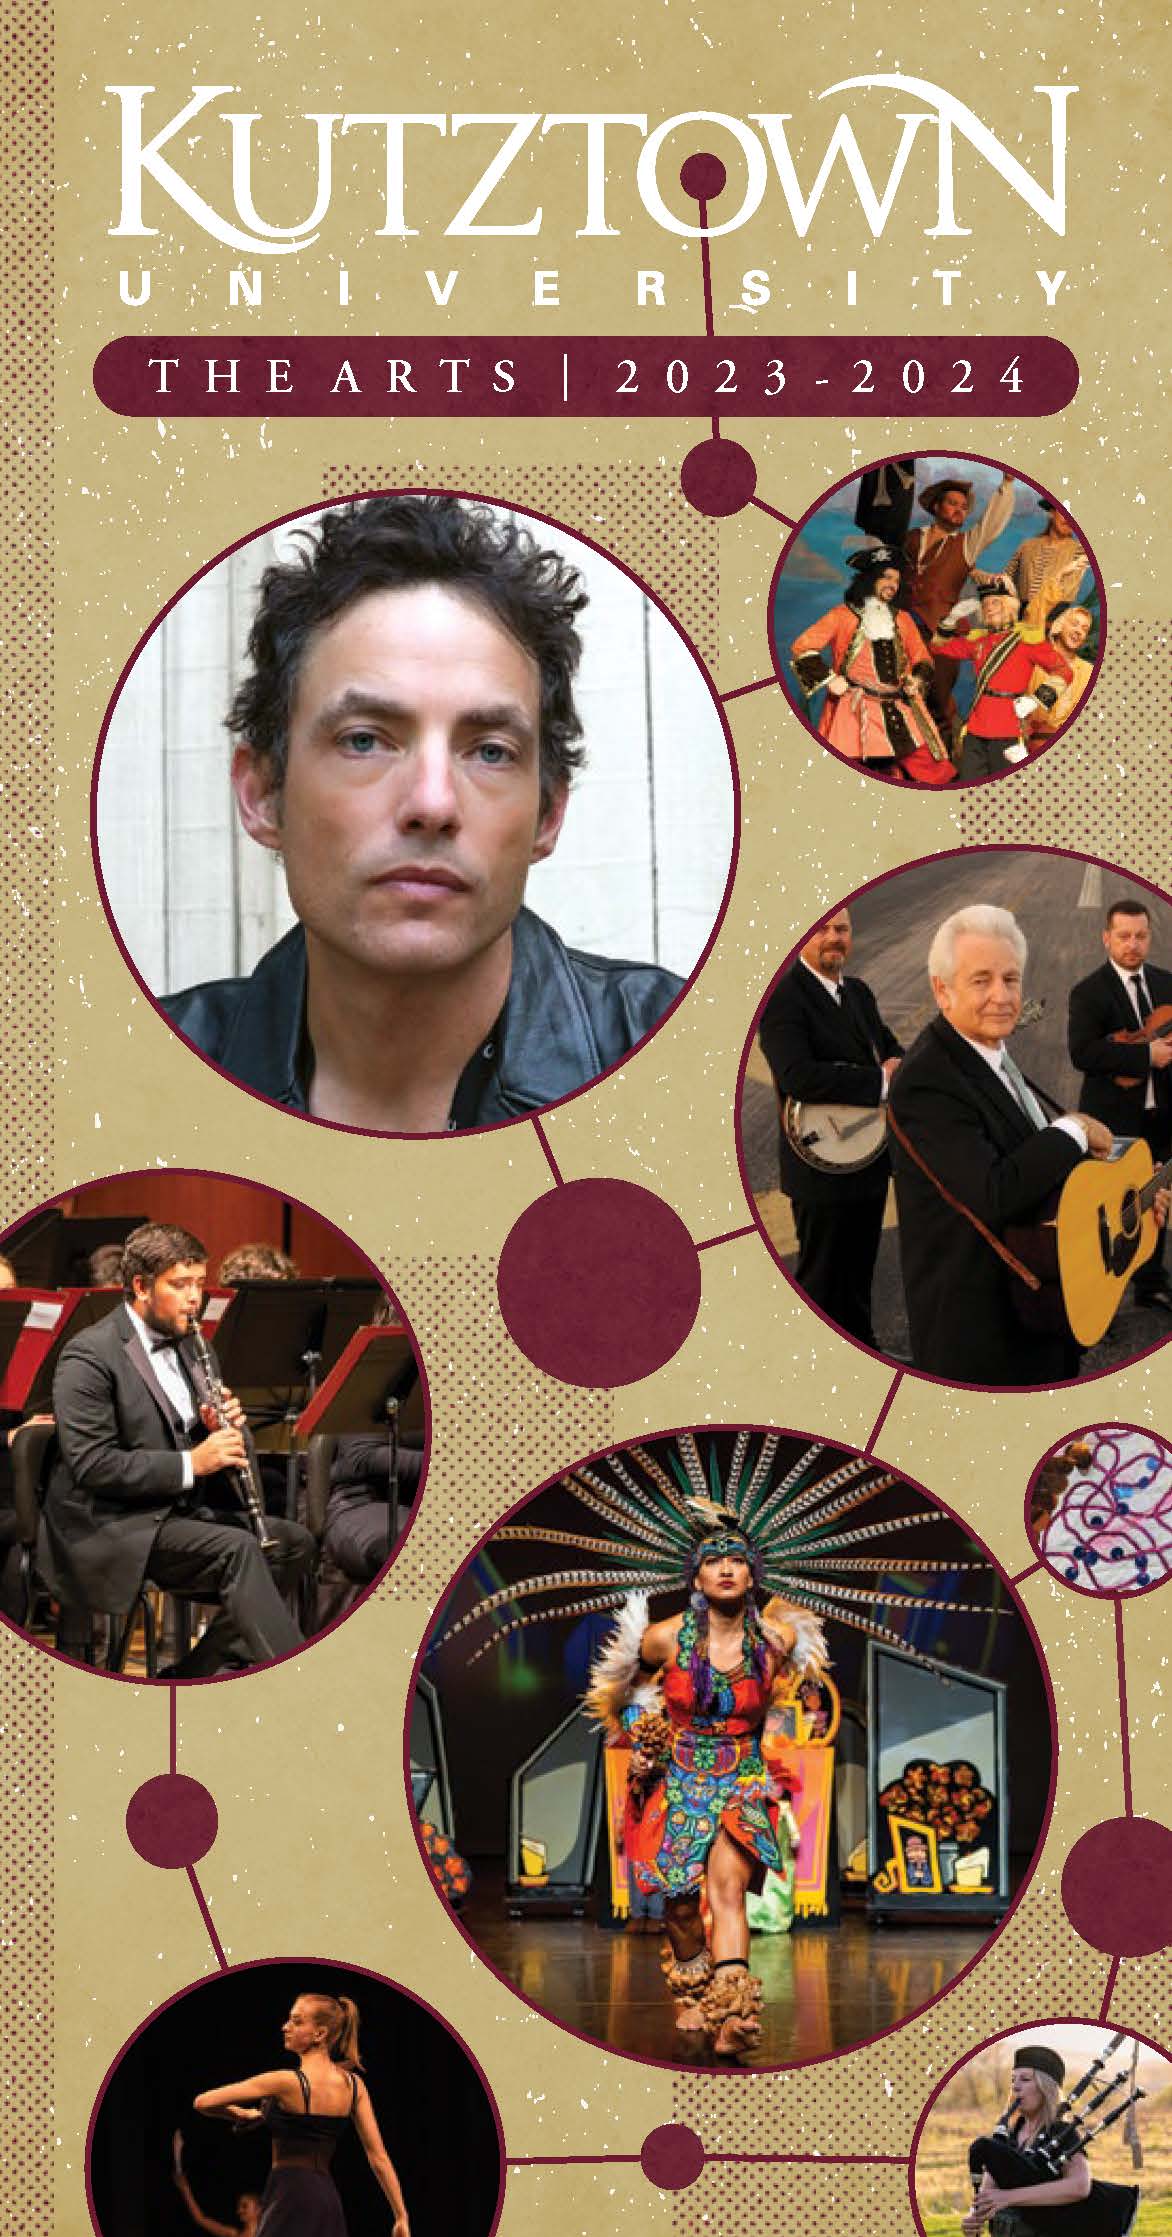 Kutztown Presents 2023 to 2024 brochure, decorated with the KU Presents logo at the top and images of the advertised performances along the cover